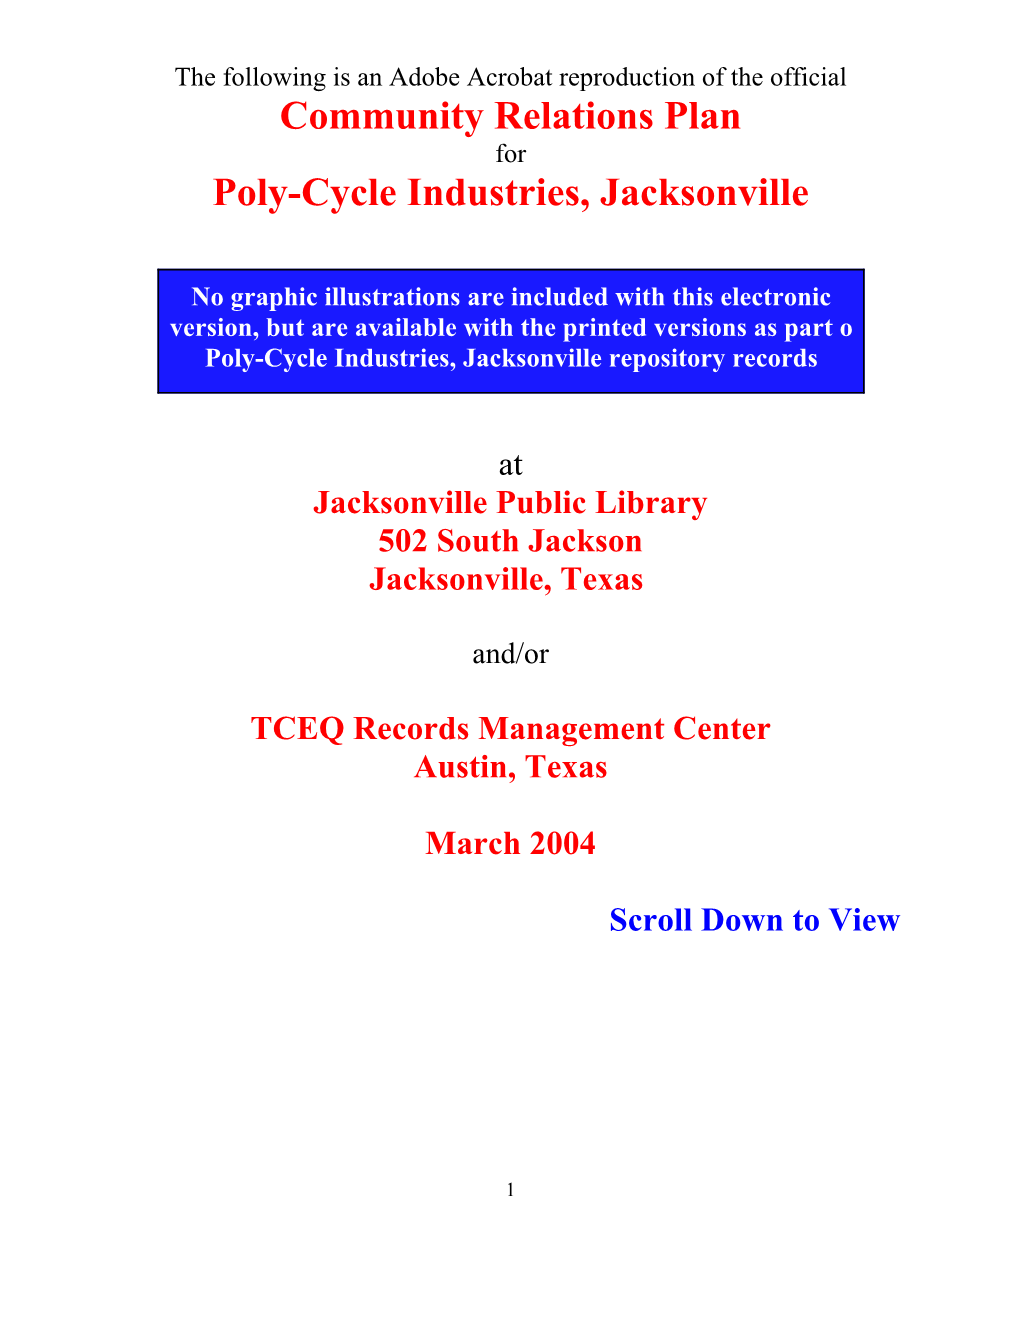 Community Relations Plan for Poly-Cycle Industries, Jacksonville